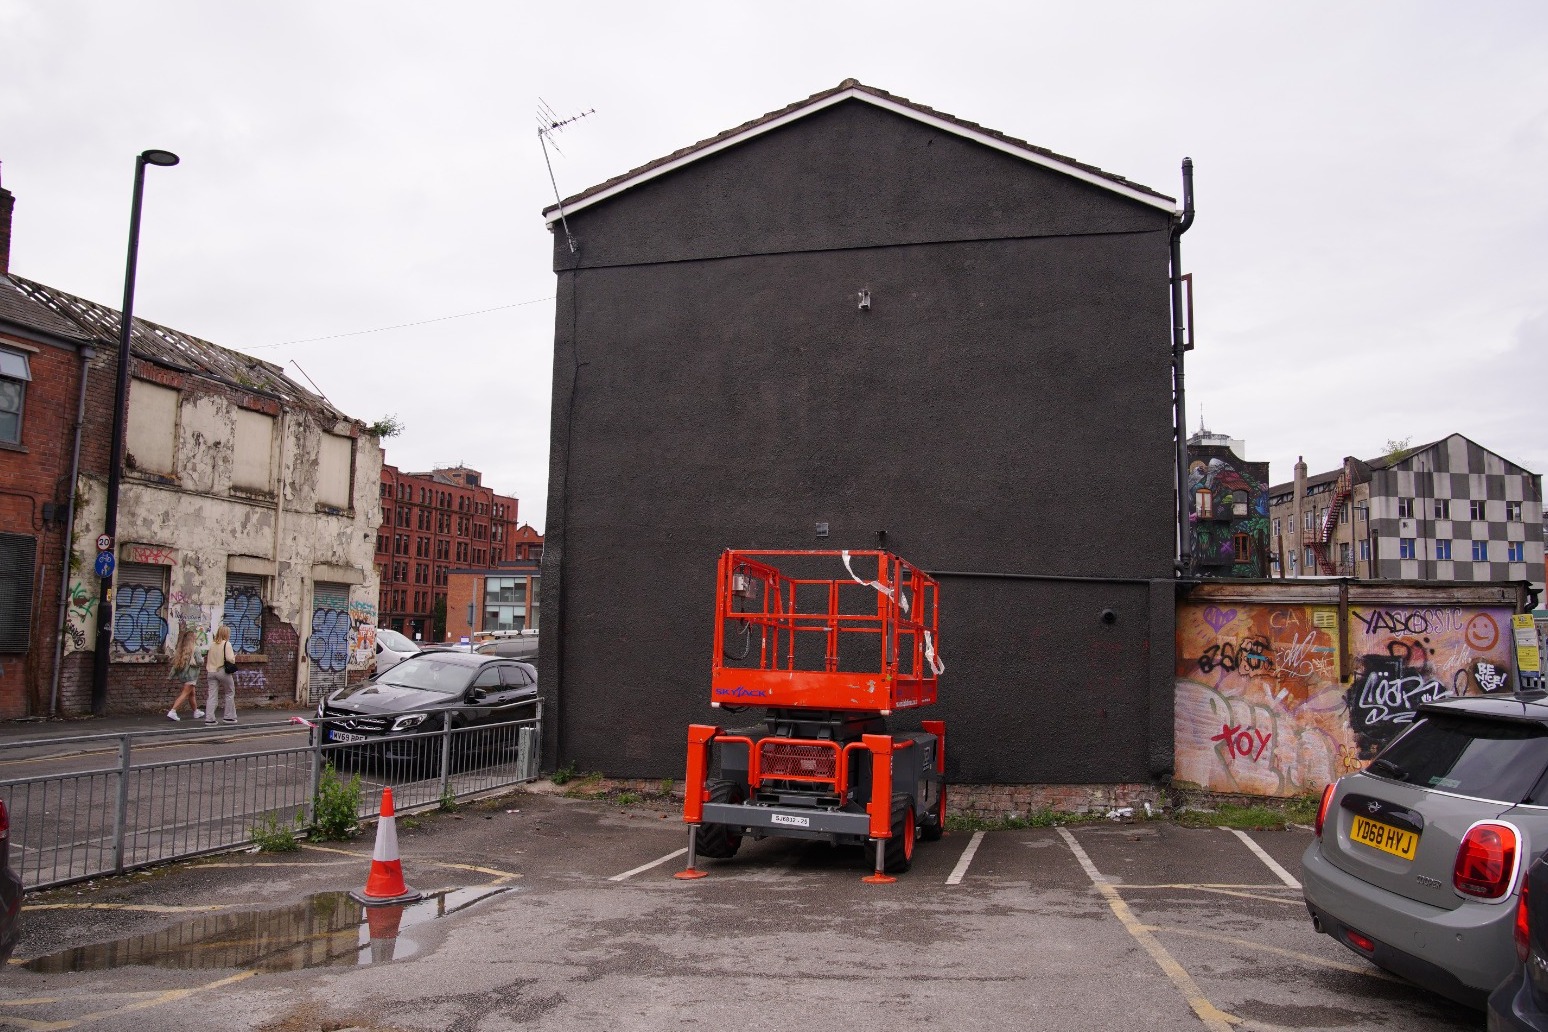 Aitch vows to ‘fix’ situation after Ian Curtis mural covered with album advert 